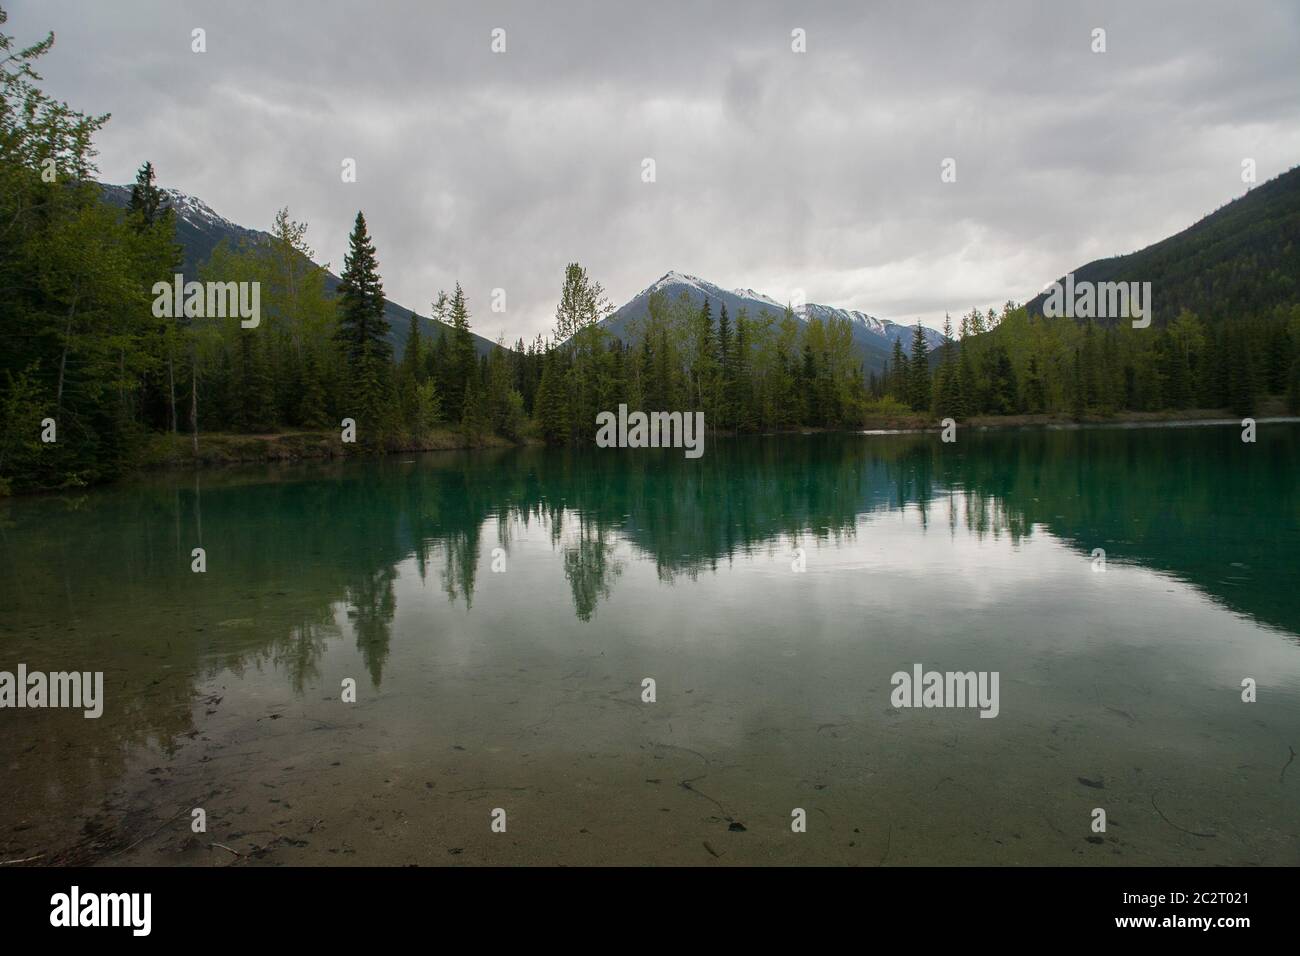 Scenic landscape of a rocky mountains lake in Alberta, Canada with rainy weather Stock Photo